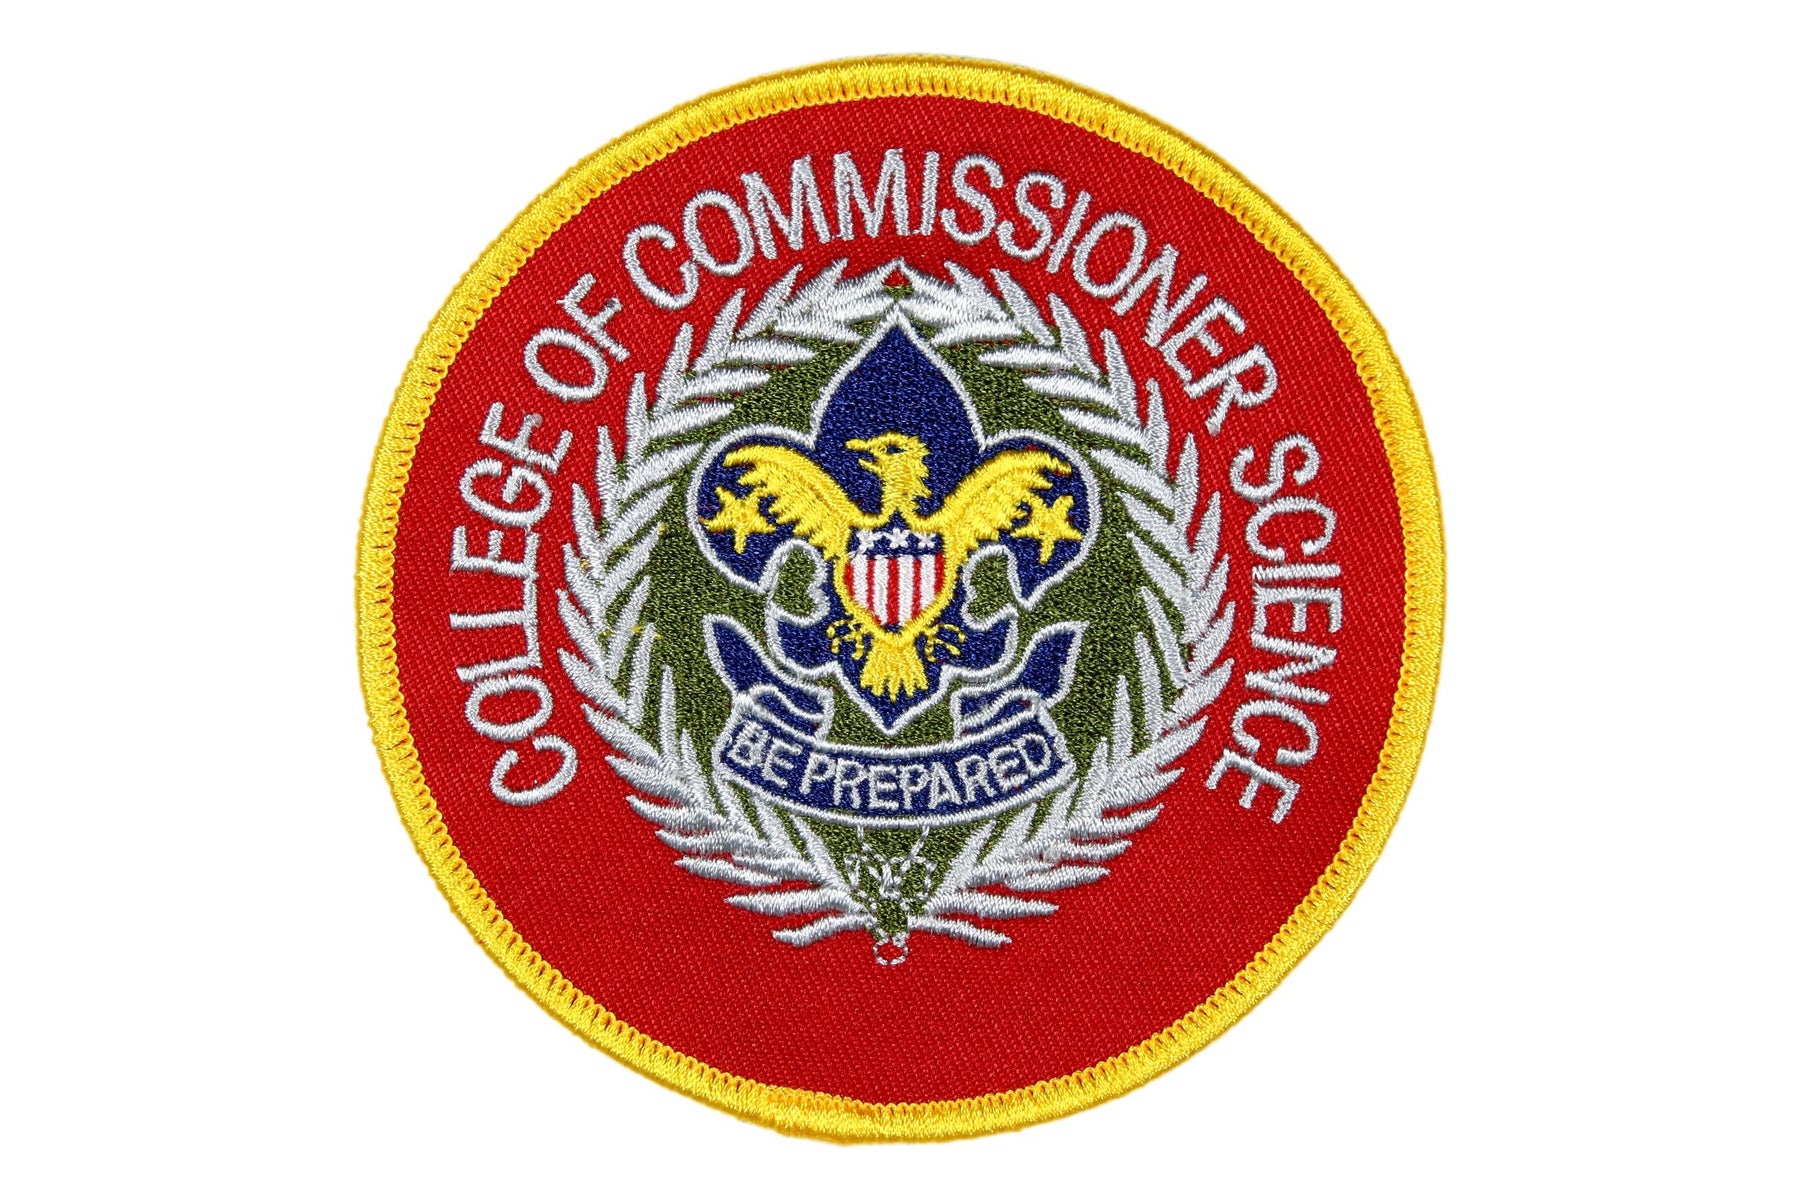 College of Commissioner Science Participant Patch 4"